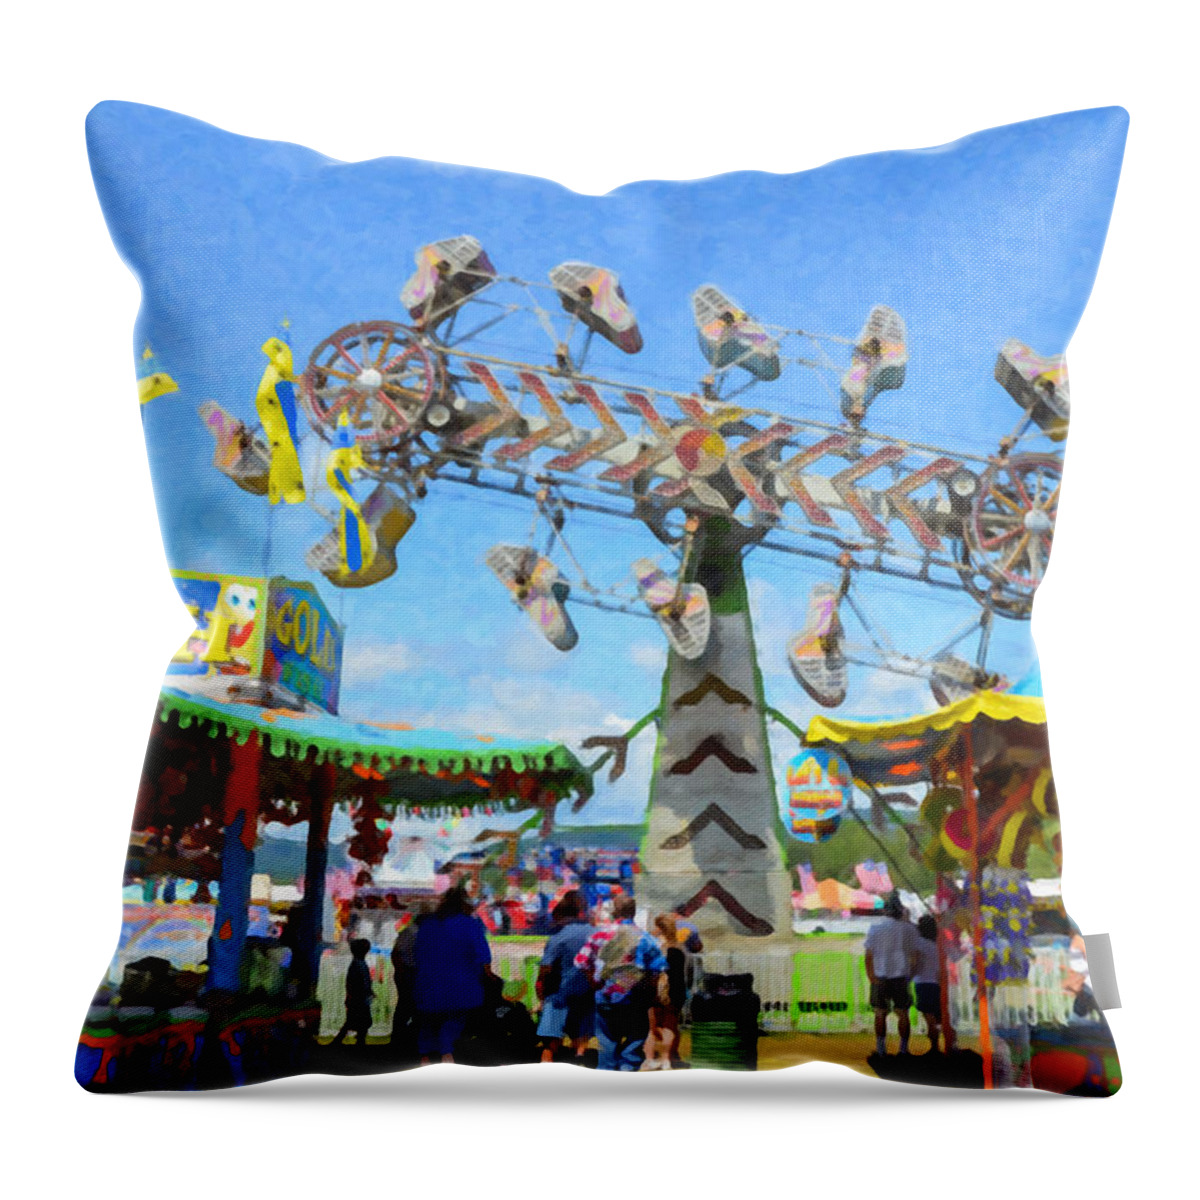 Carnival Zipper Throw Pillow featuring the painting Carnival Zipper by Jeelan Clark